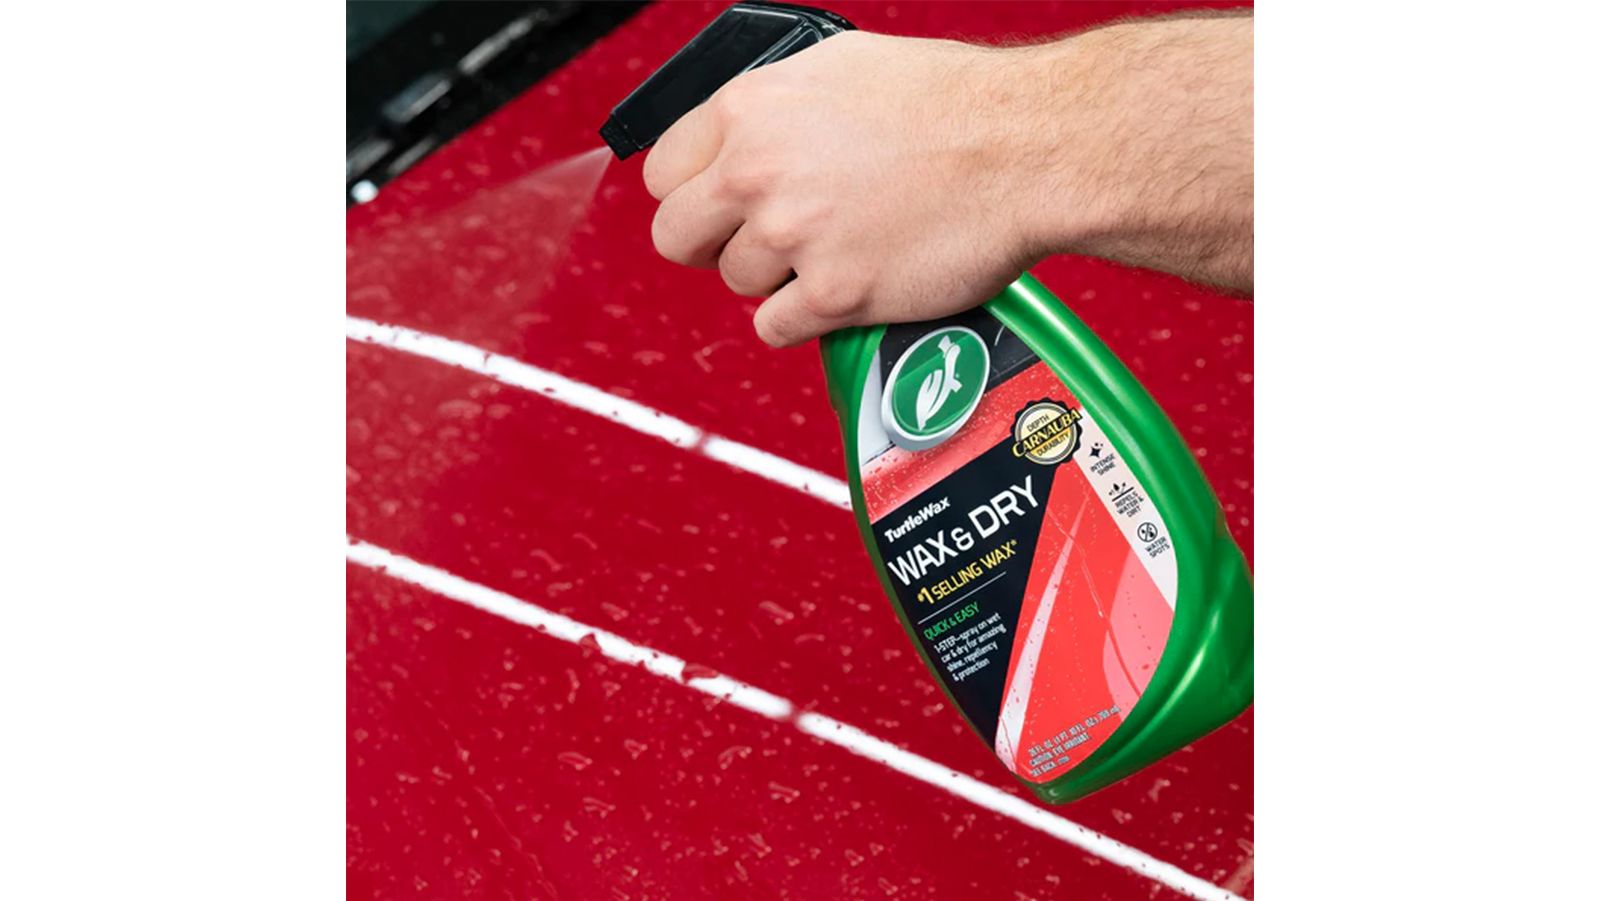 Turtle Car Wax: How to go from good, to much better!